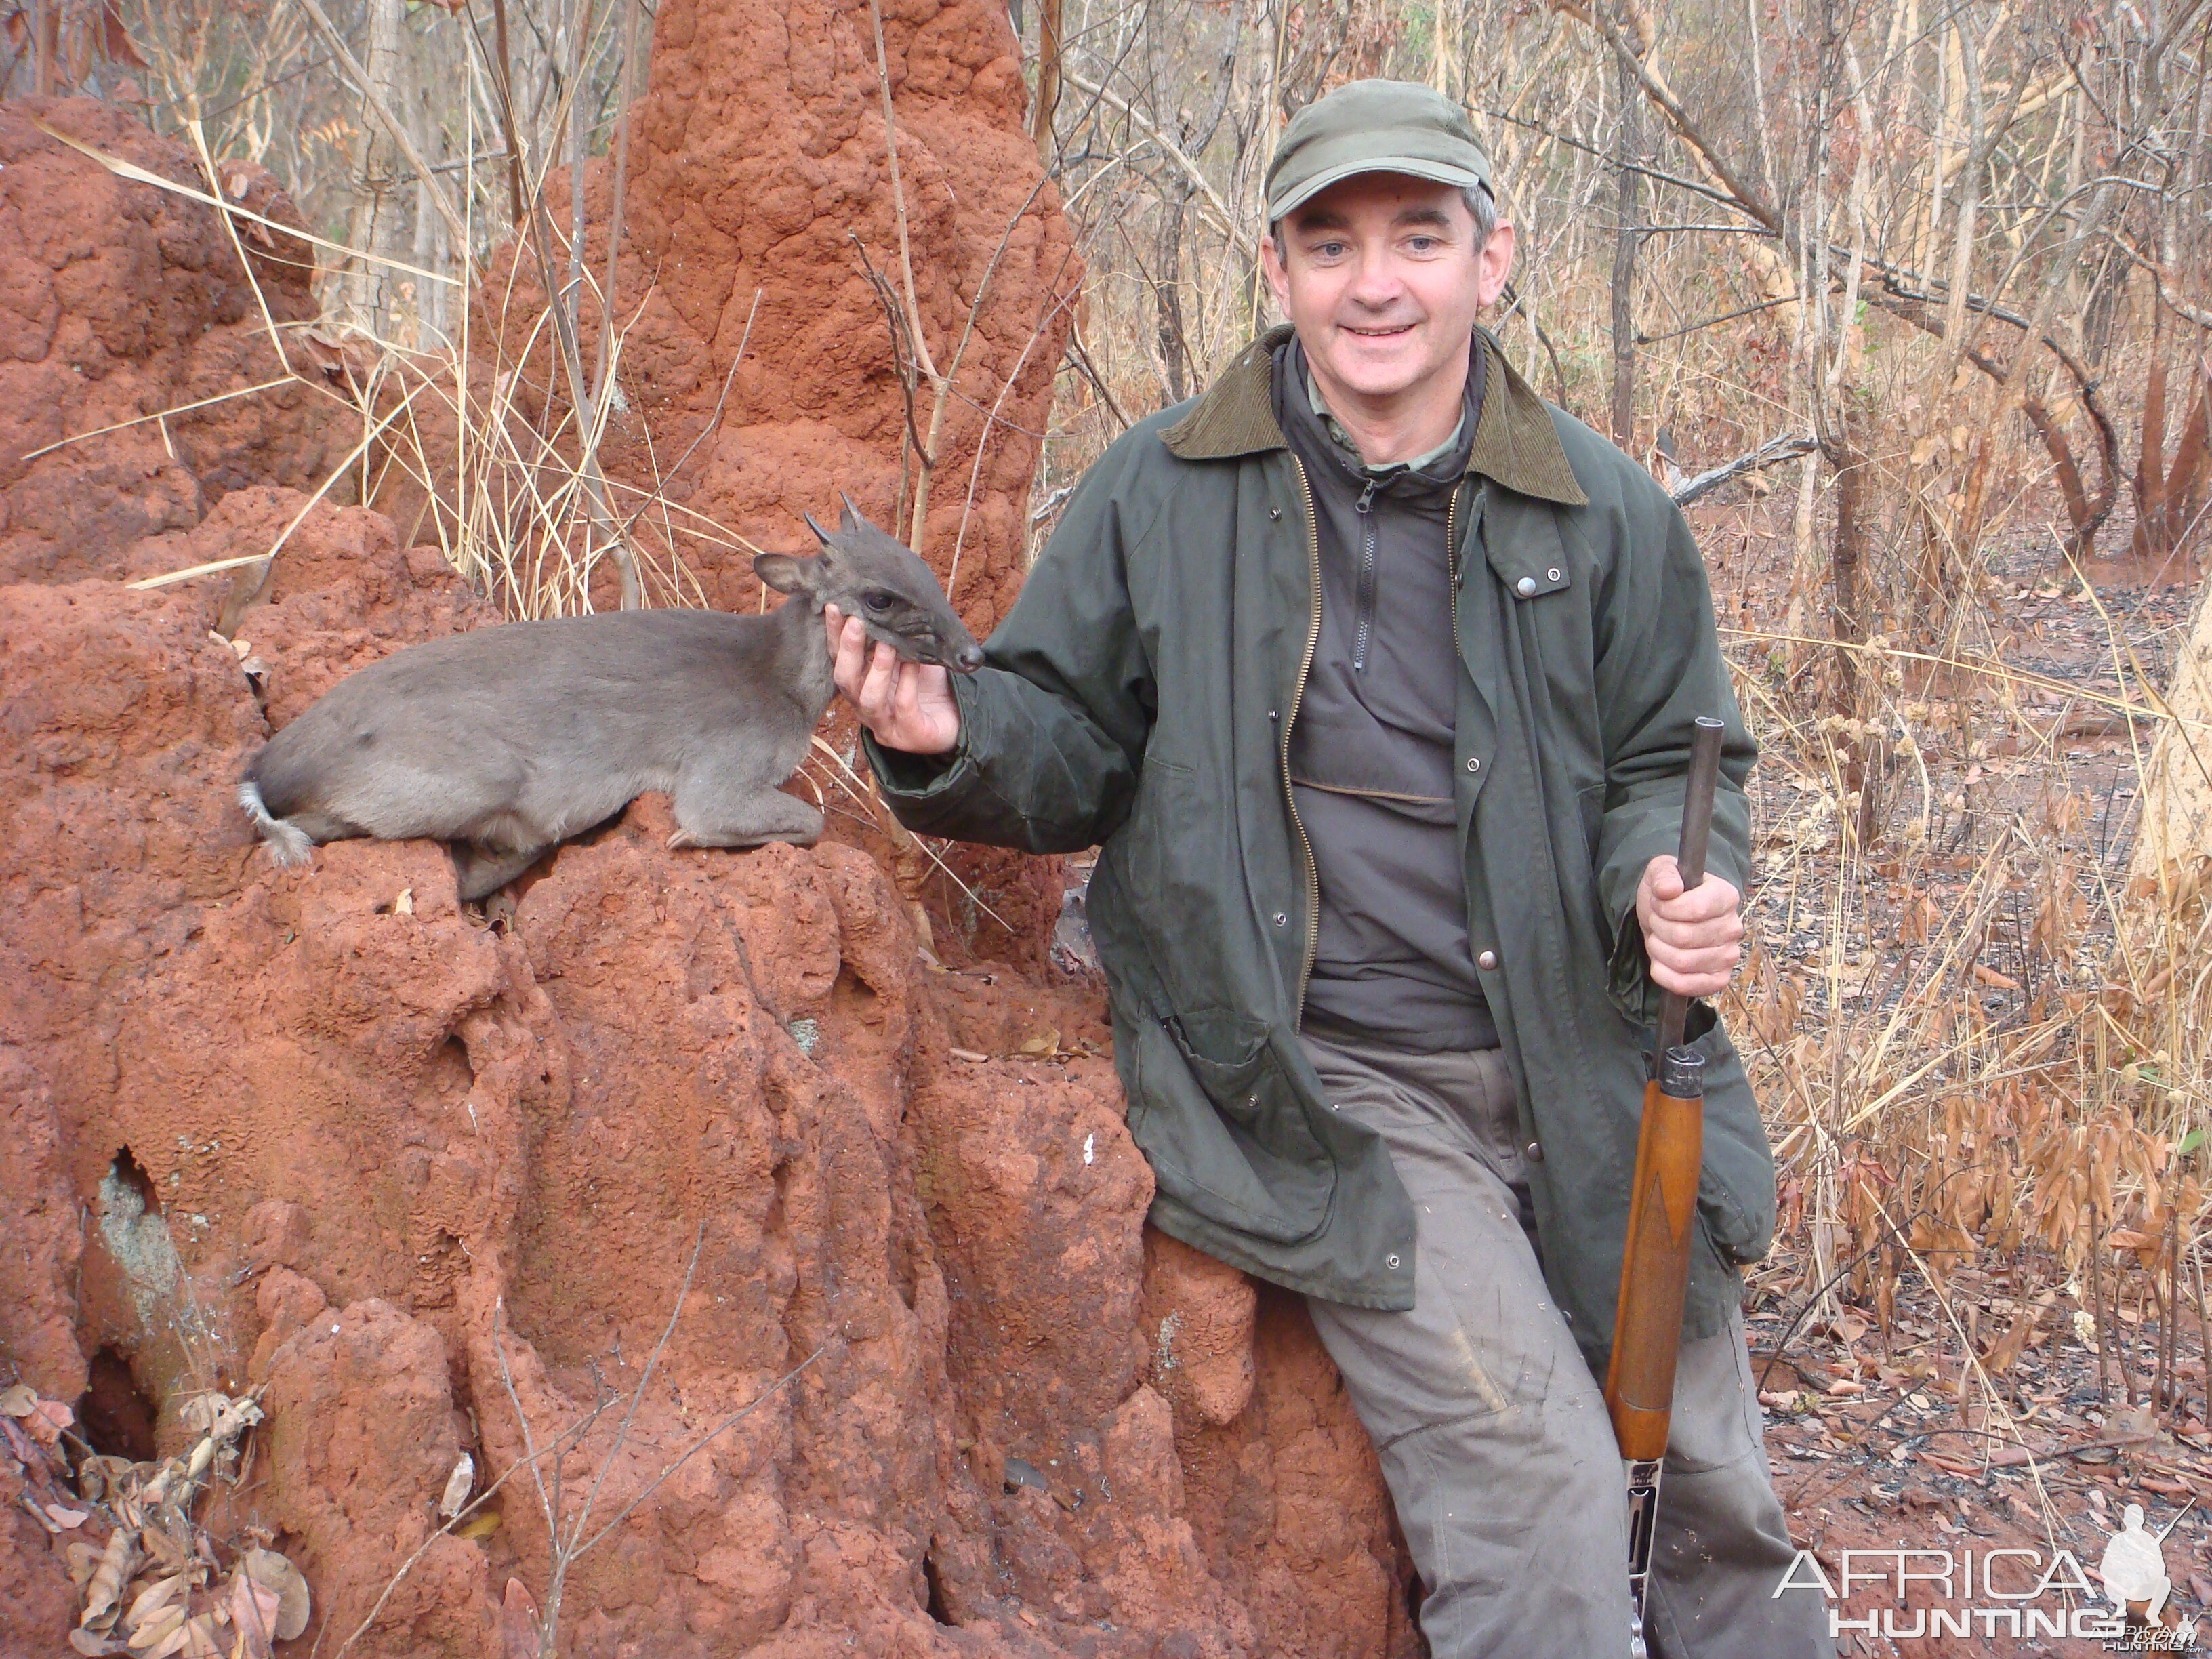 Blue Duiker hunted in Central Africa with Club Faune